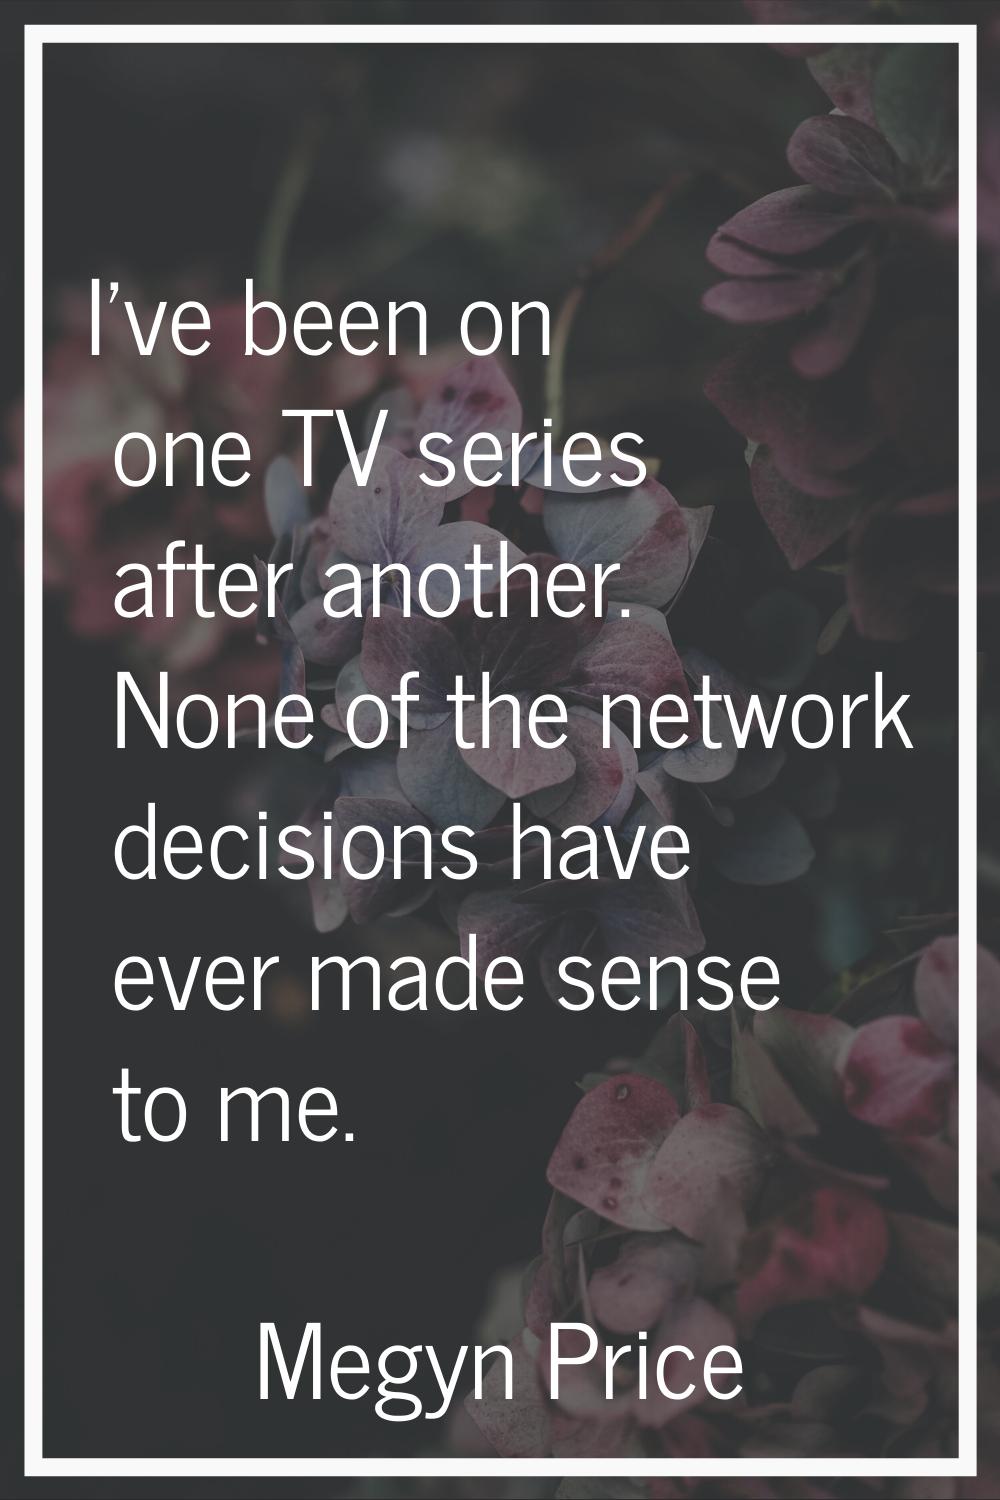 I've been on one TV series after another. None of the network decisions have ever made sense to me.